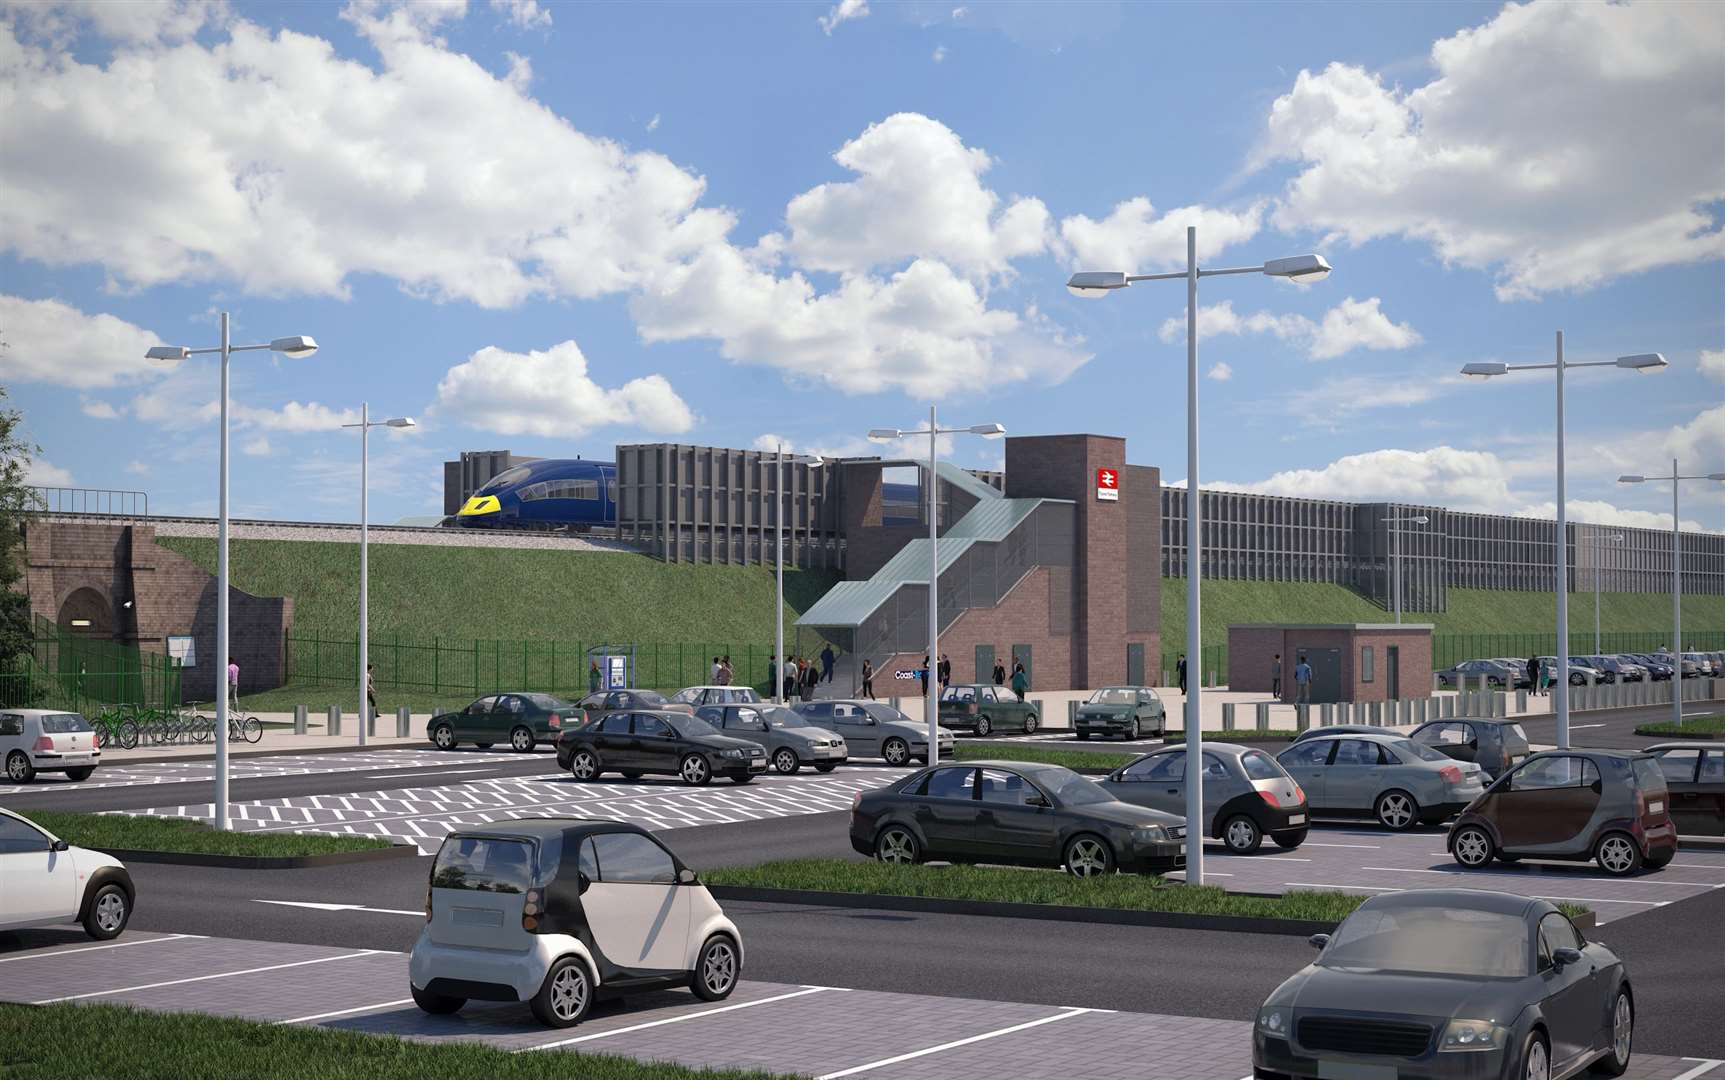 An artist’s impression of the Thanet Parkway site